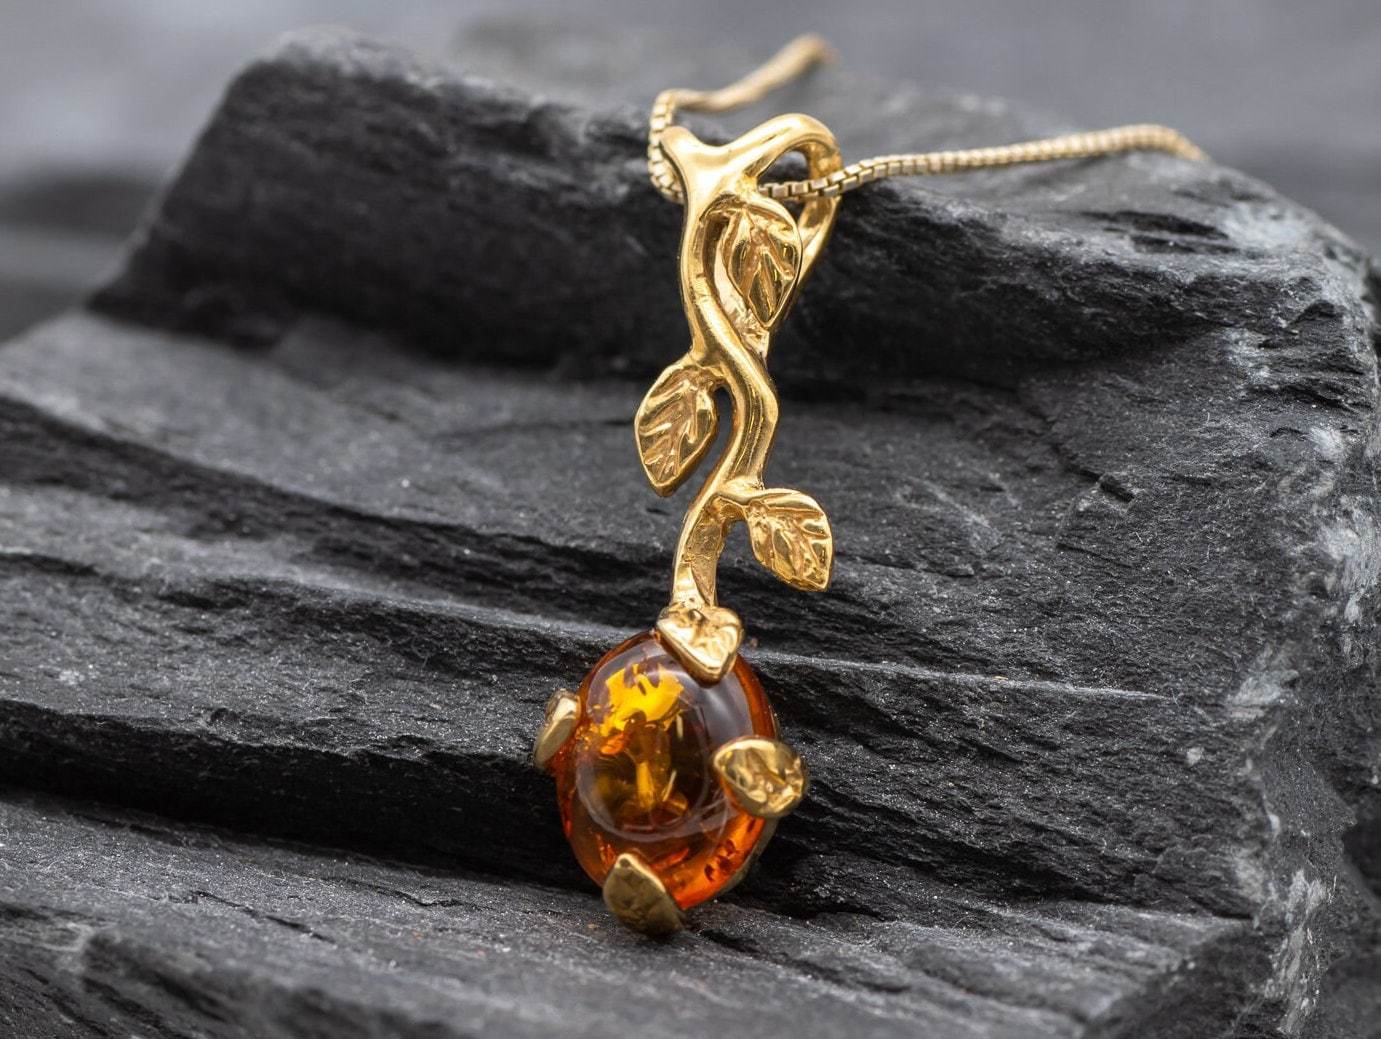 Buggy Amber Necklace 16 Inches – bluestemcrafts